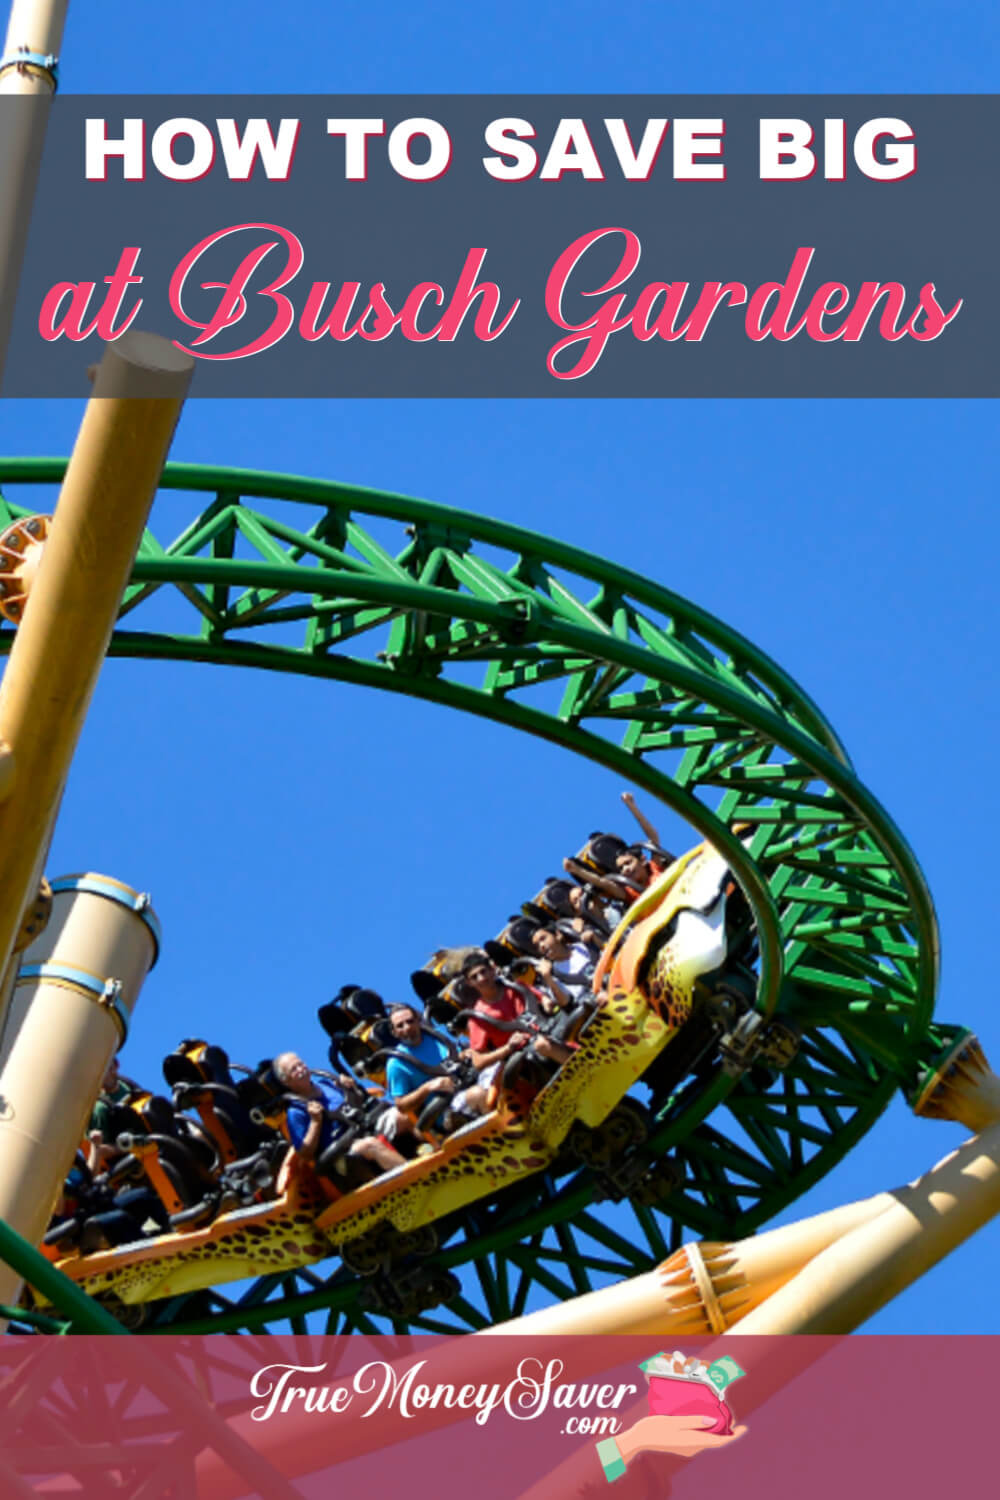 How To Save BIG At Busch Gardens